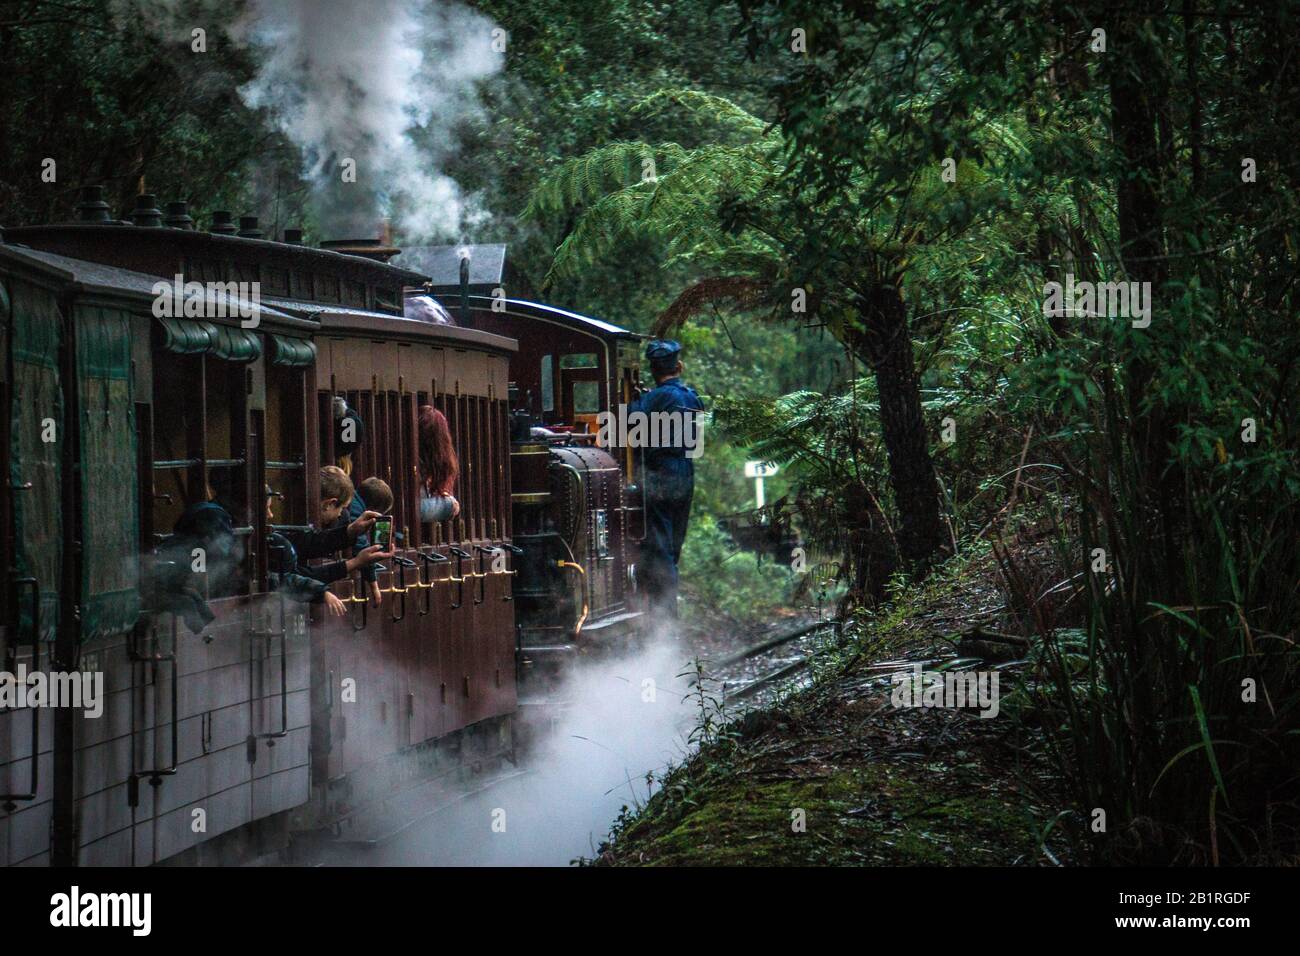 Historic steam train Puffing Billy located in Dandenong Ranges, the east of Melbourne, Victoria, Australia. Stock Photo